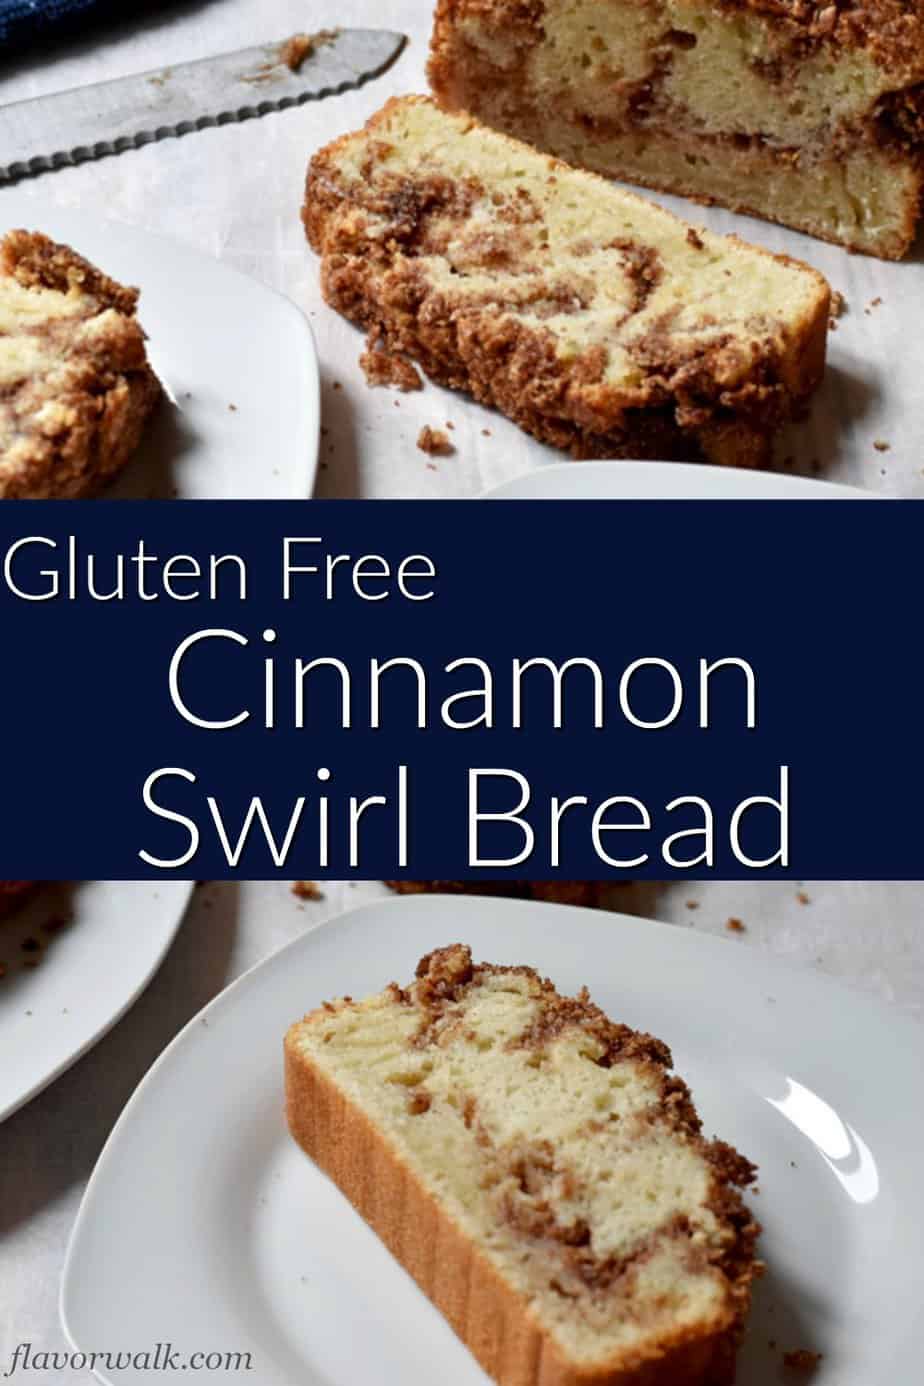 Top image is slices of gluten free cinnamon bread and a bread knife, middle image is blue text overlay, bottom image is 1 slice of gluten free cinnamon bread.